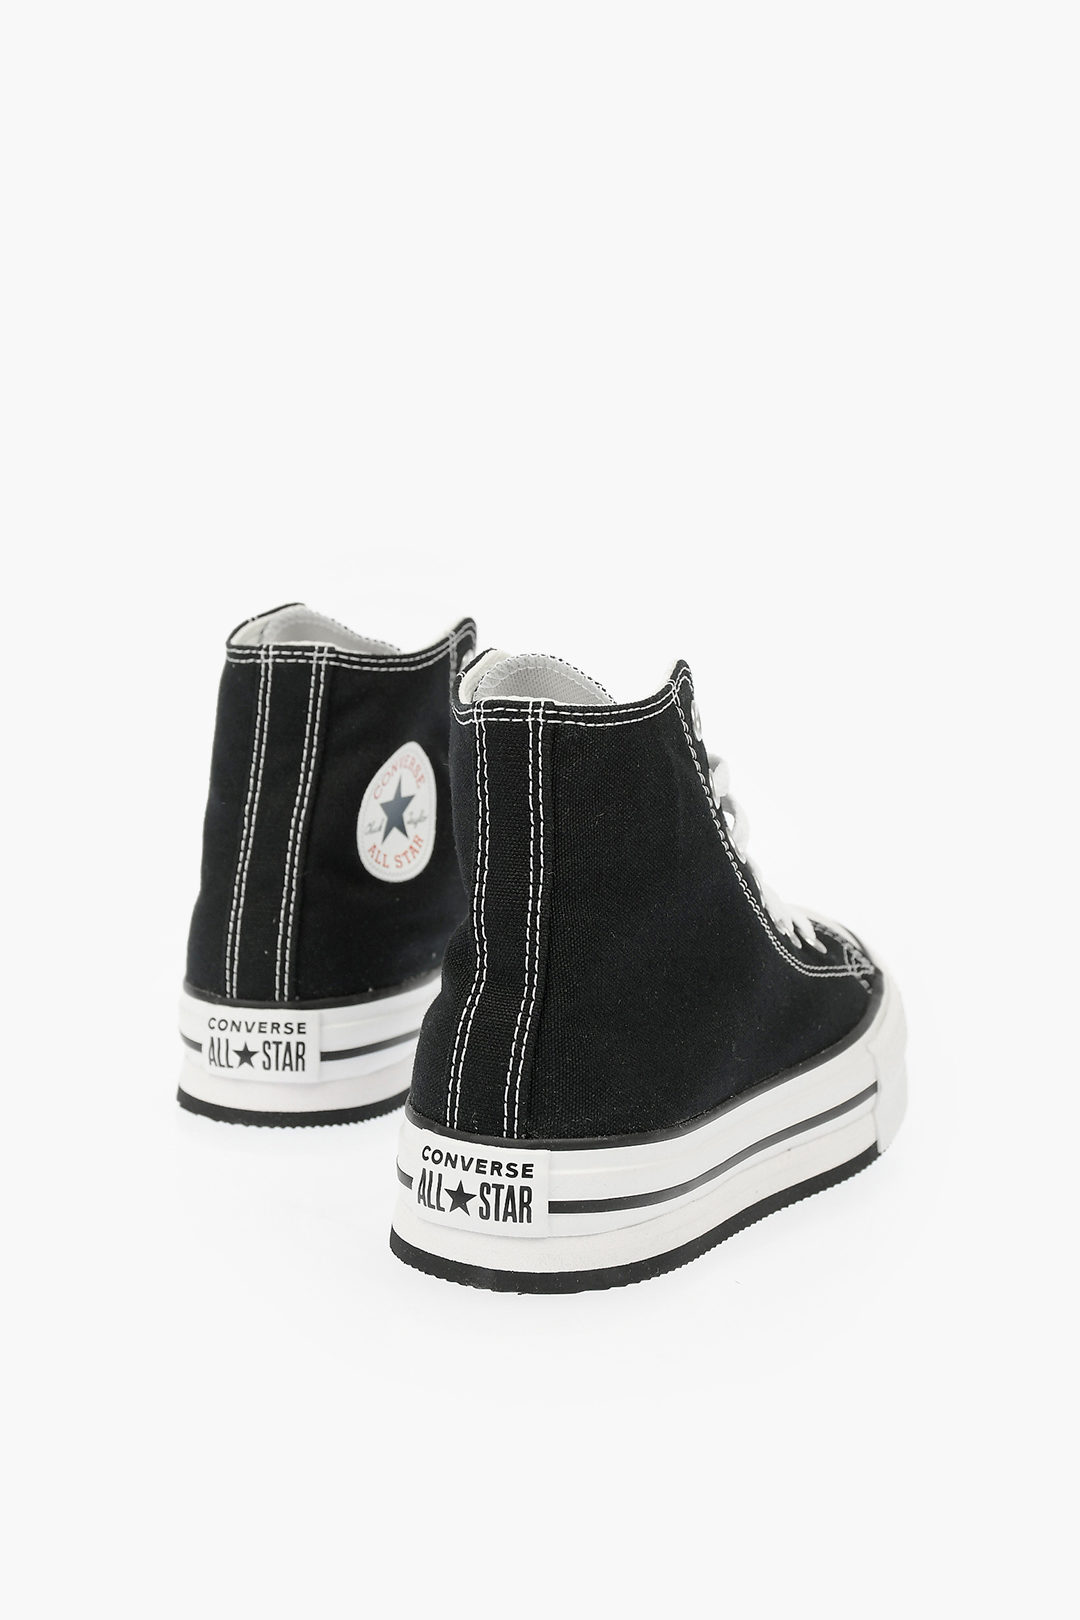 Converse KIDS ALL STAR Fabric Sneakers unisex children boys girls - Glamood  Outlet